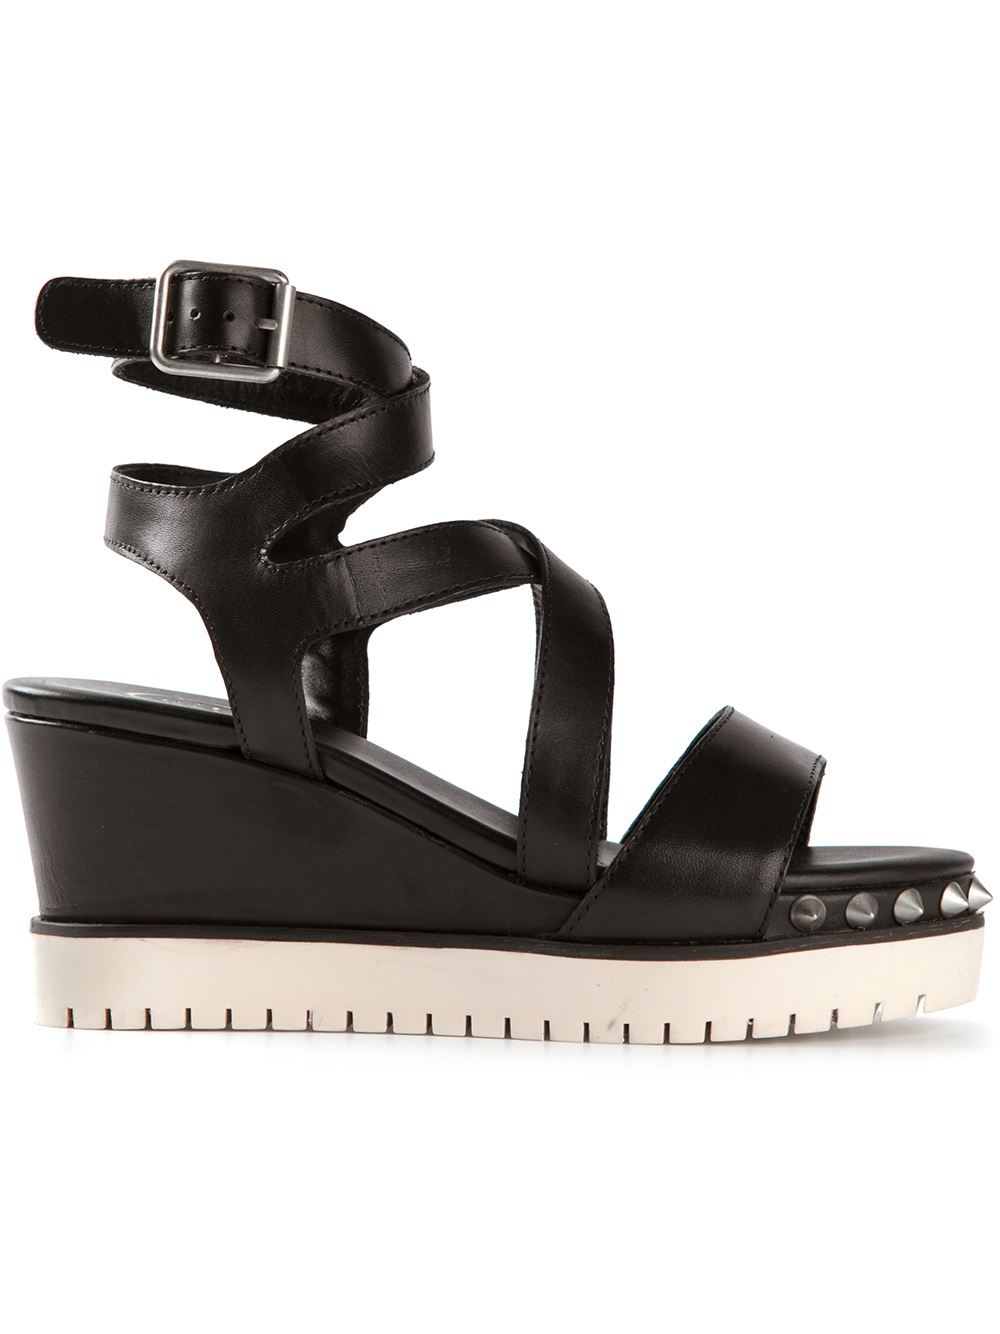 Ash Studded Wedge Sandals in Black - Lyst